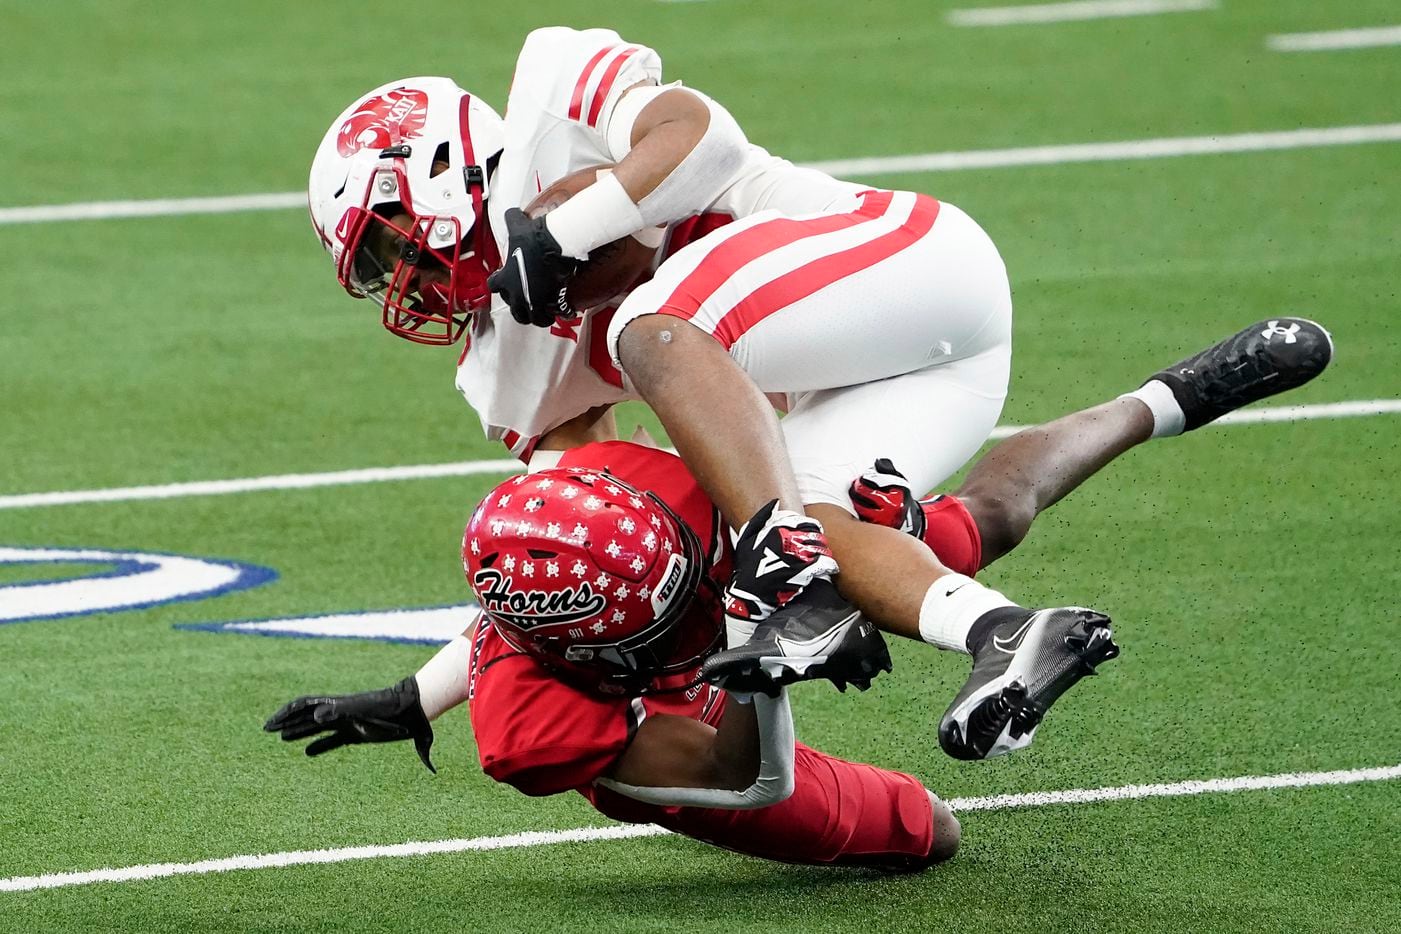 Katy running back Isaiah Smith (26) is knocked off his feet by Cedar Hill cornerback Amarian Williams (9) during the first half of the Class 6A Division II state football championship game at AT&T Stadium on Saturday, Jan. 16, 2021, in Arlington, Texas.